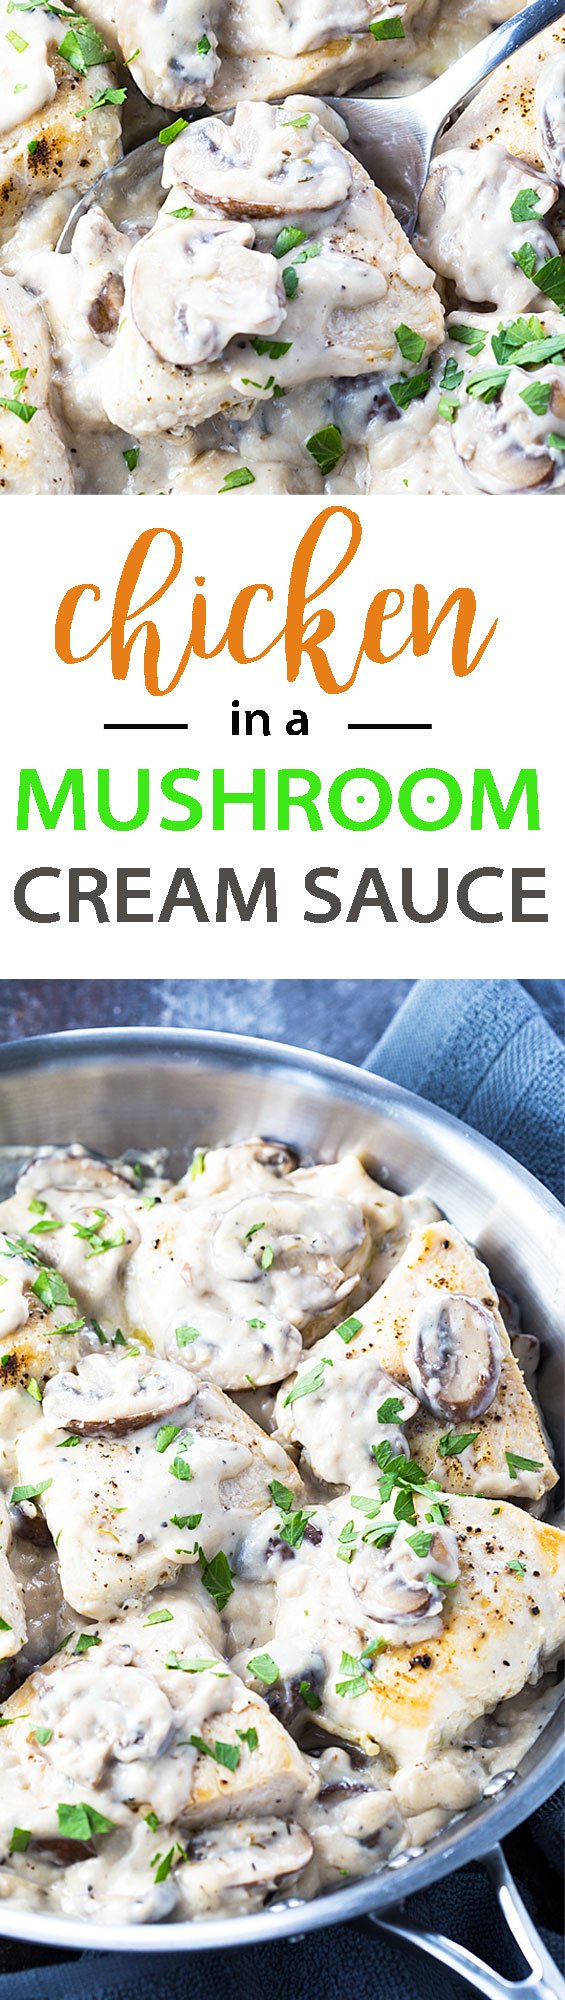 A two image vertical collage of chicken in a garlic mushroom sauce with overlay text.